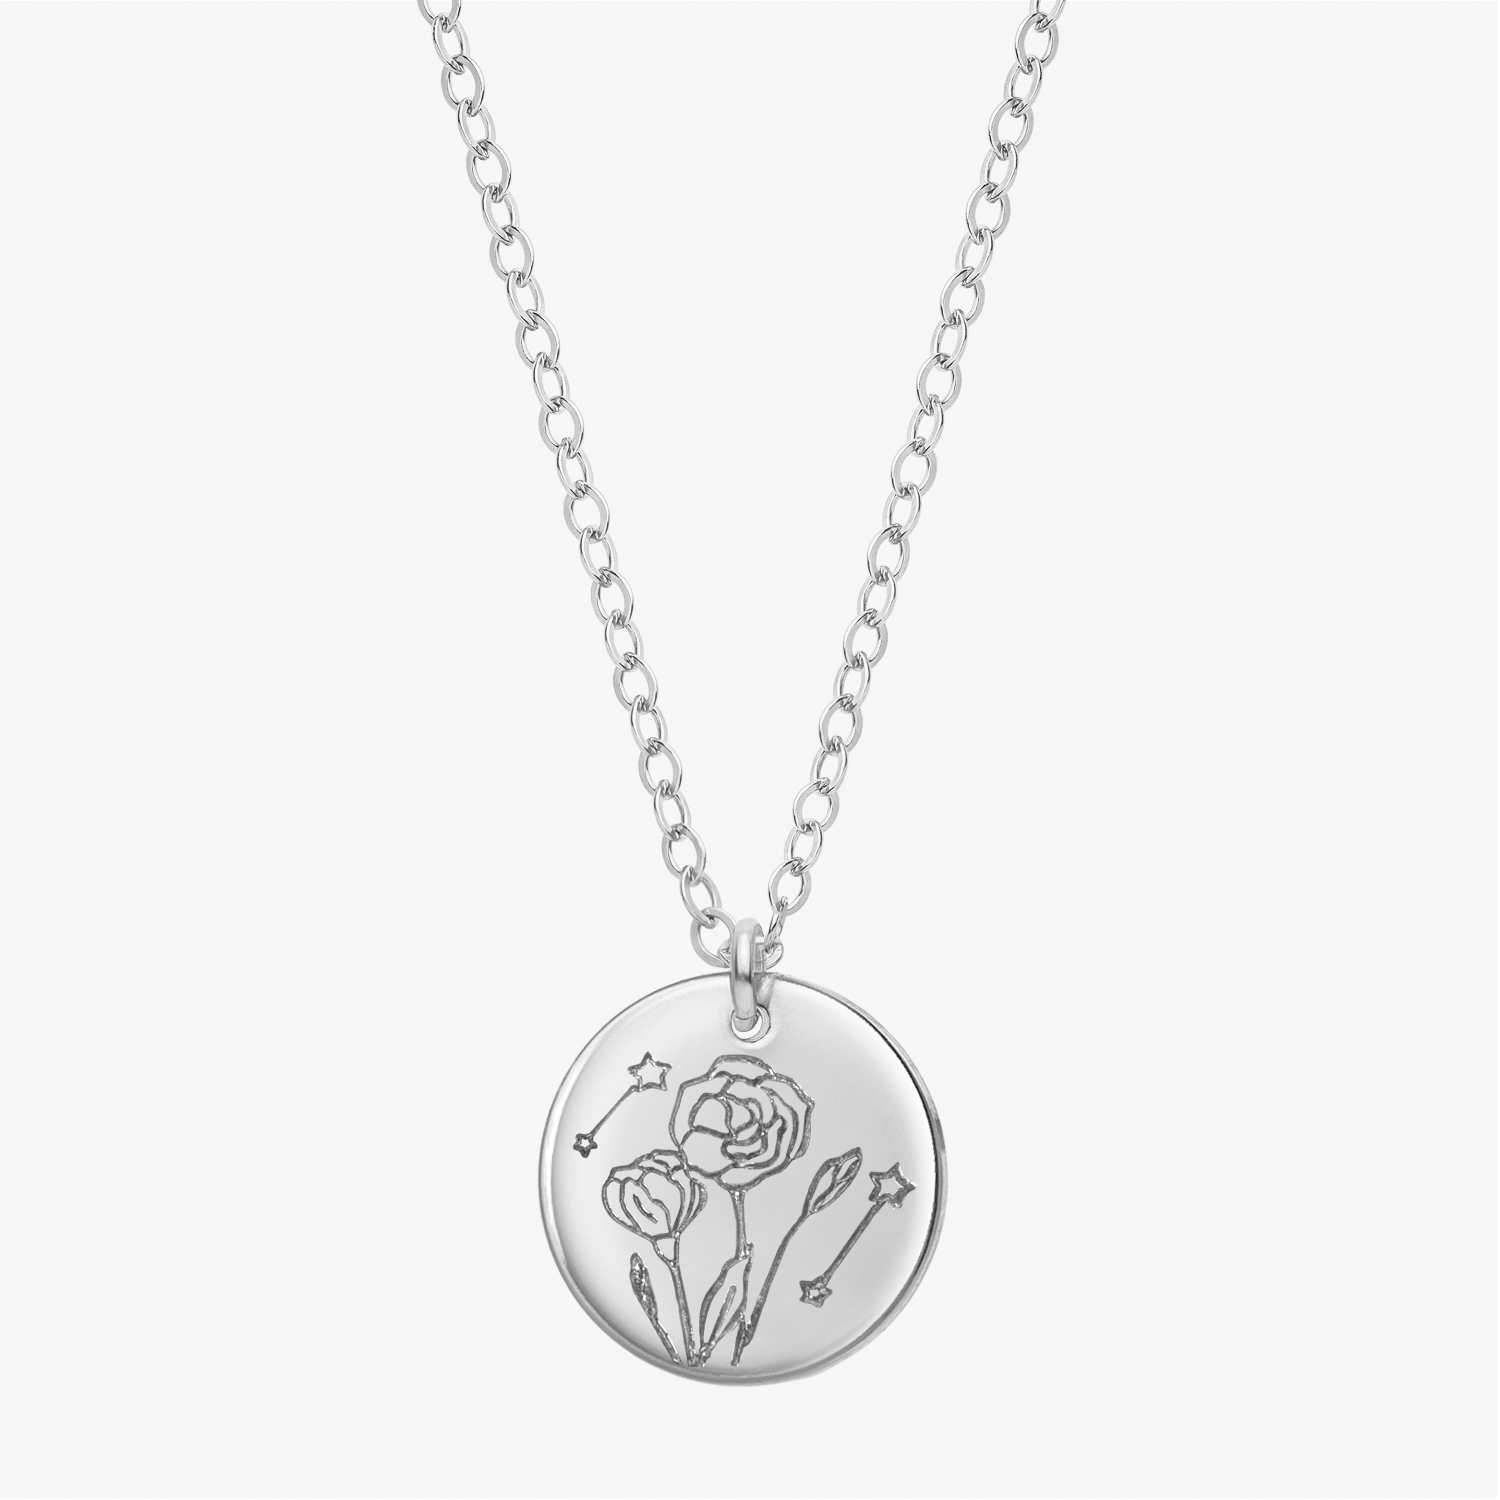 Personalized Stardust Bloom Necklace